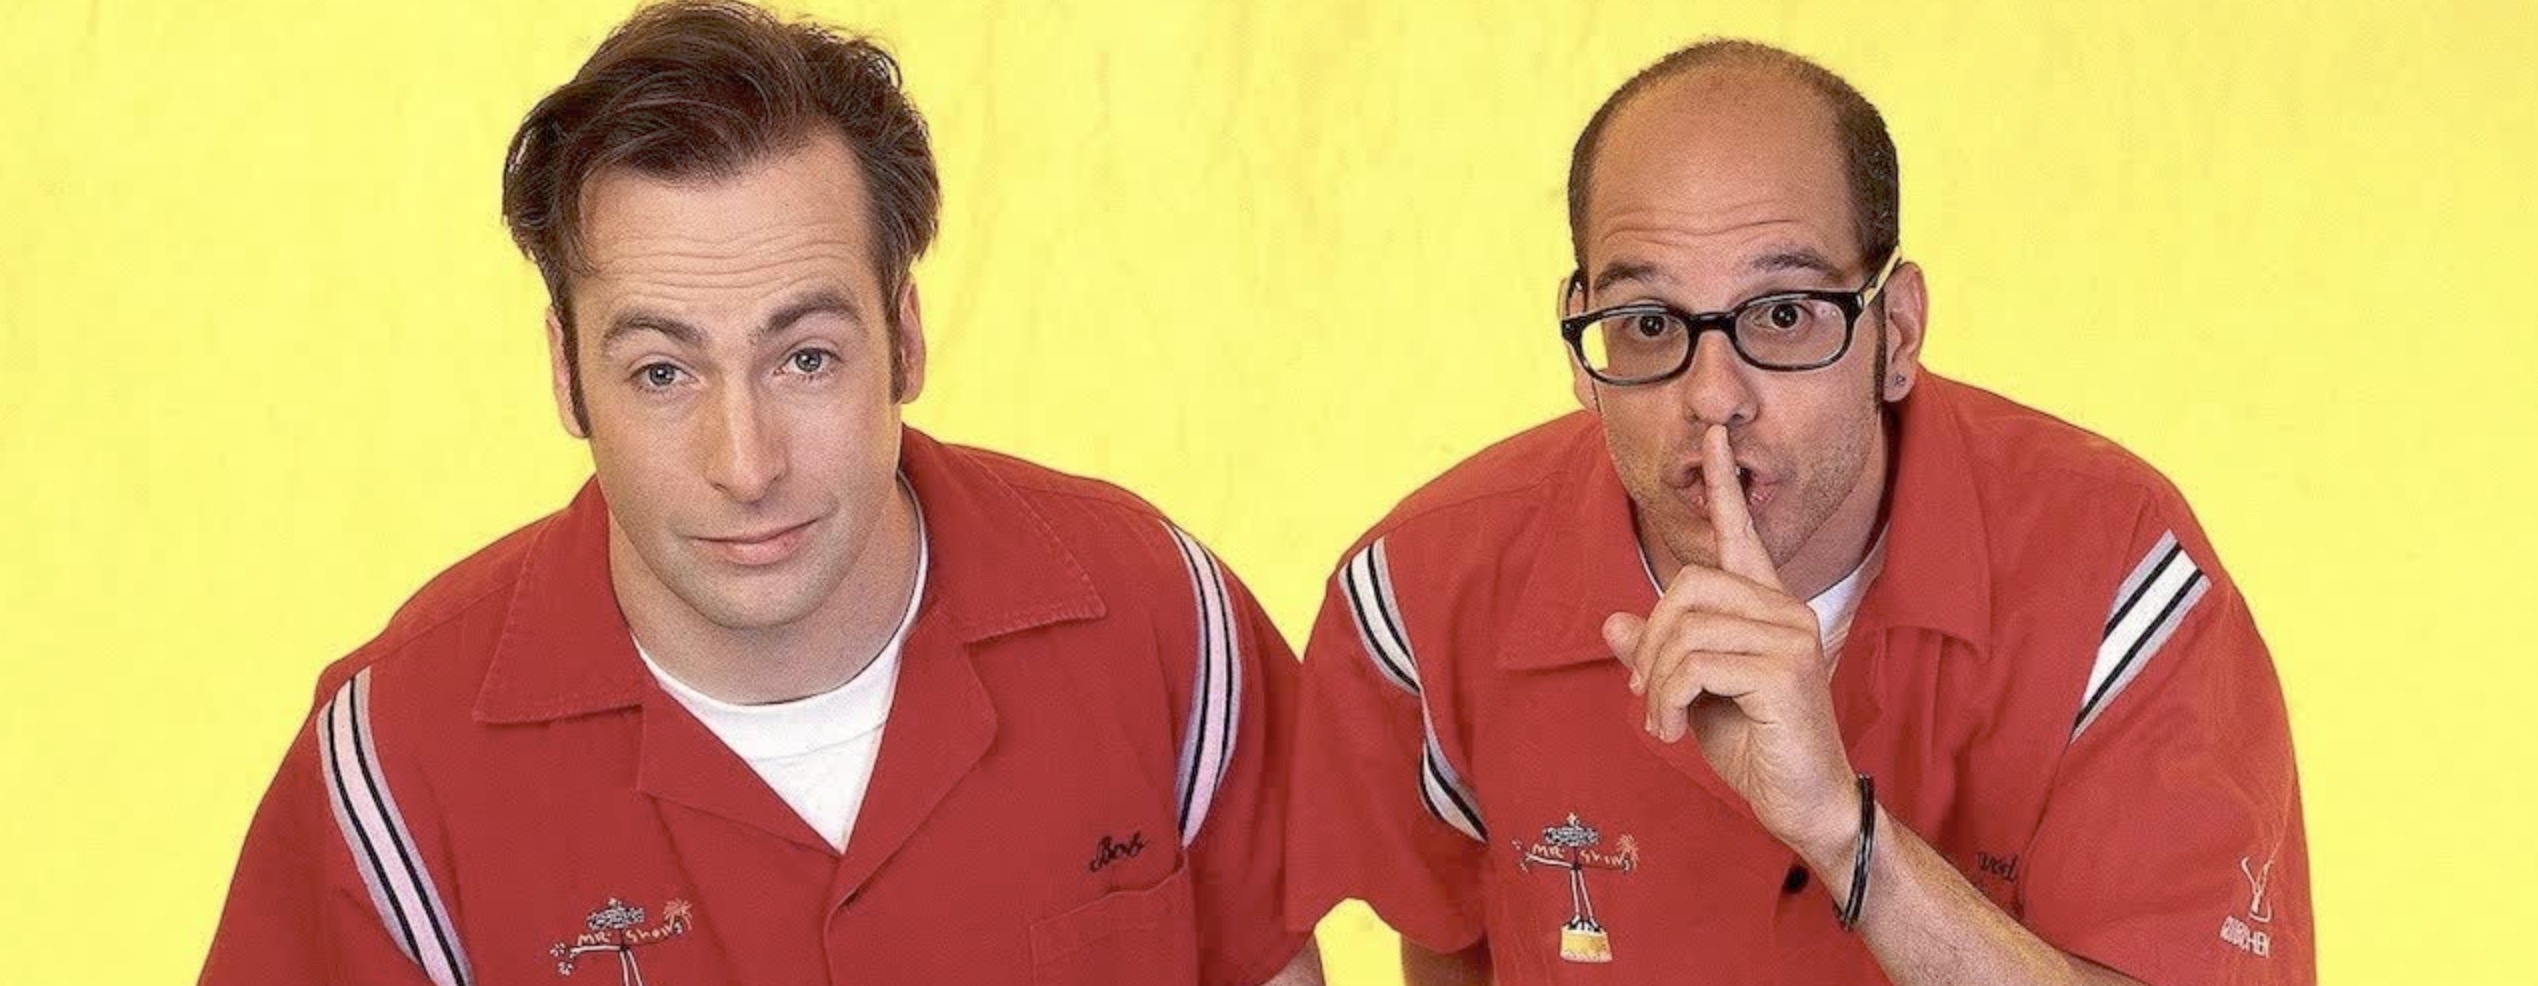 David Cross: Bob Odenkirk Is 'Doing Great' Following His Health Scare